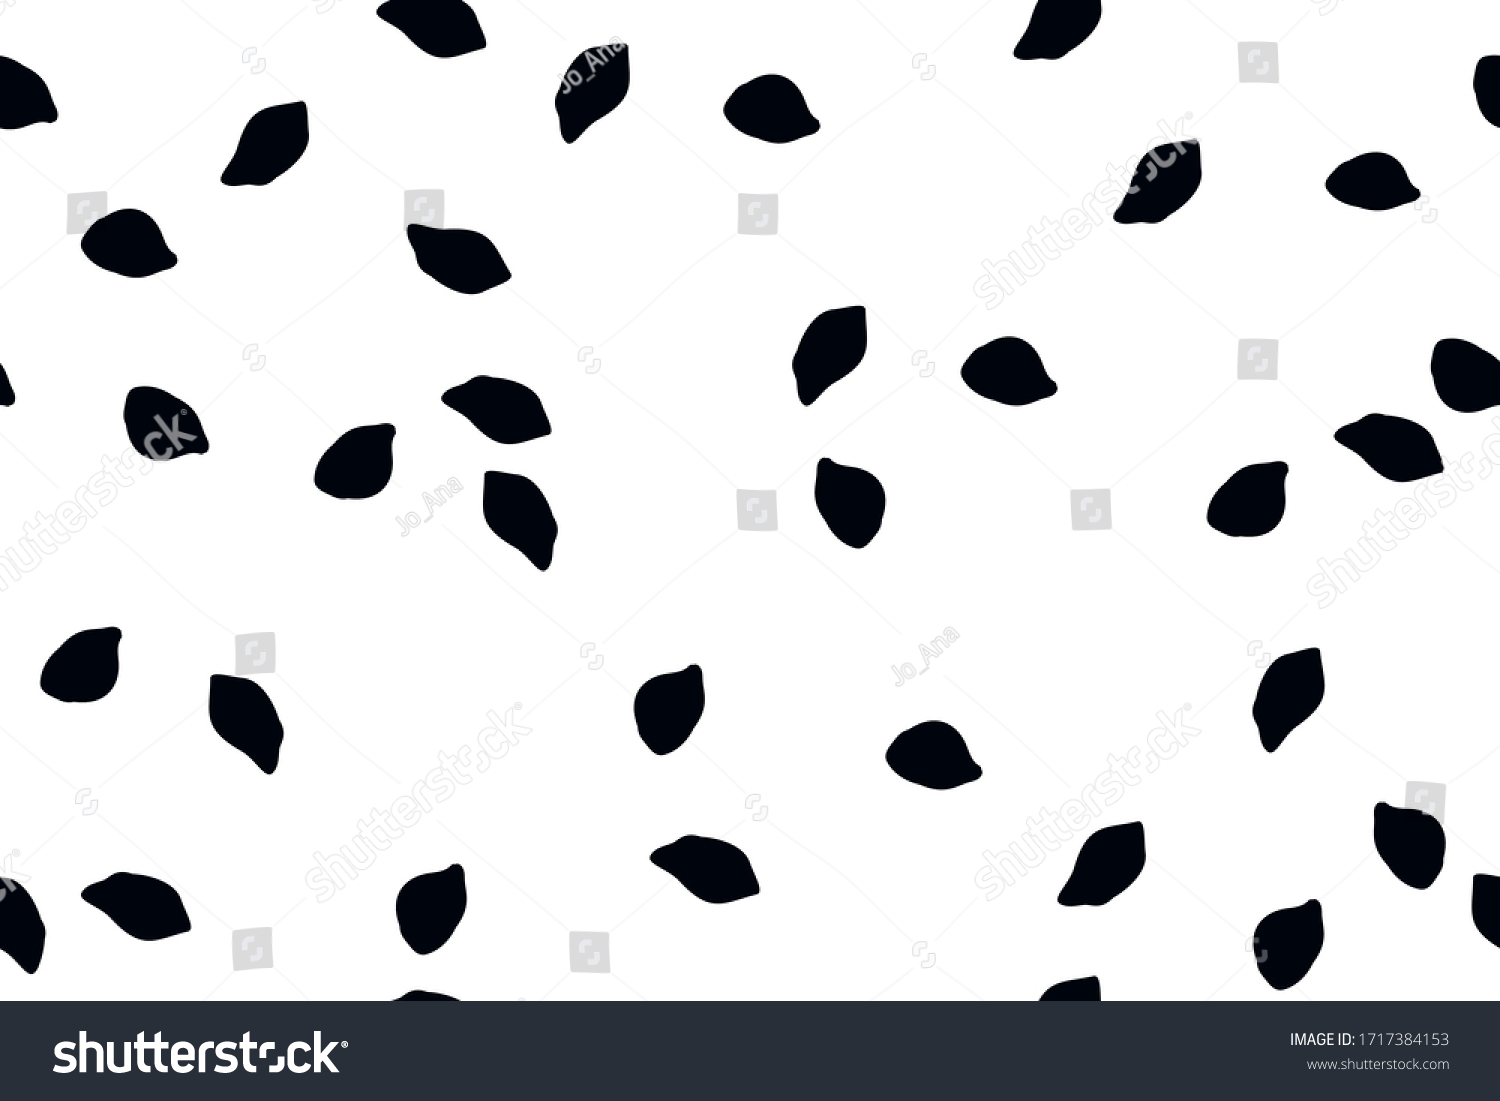 Elegant seamless pattern with black colors petals gliding in the air. Rings petals.  Falling floral or fruit trees petals in white  background. For fabric, textile, fashion, paper industry. Vector